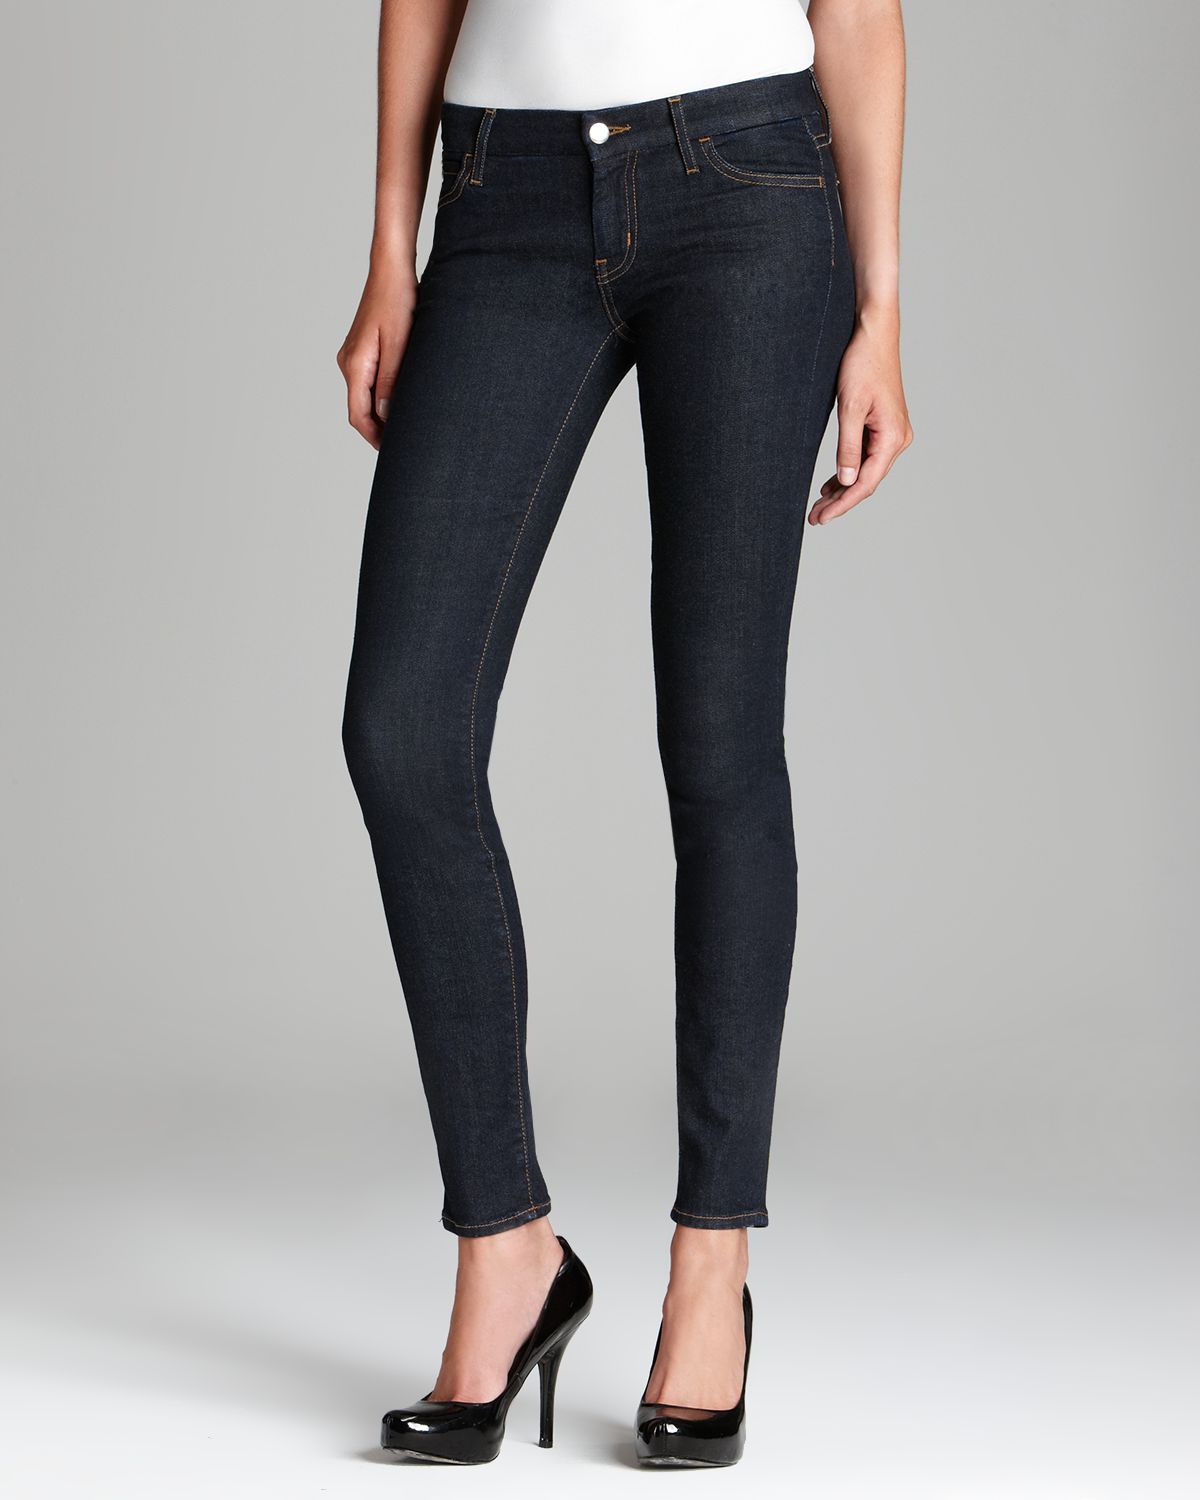 Lyst - Koral Jeans - Core Lived-In Skinny in Blue